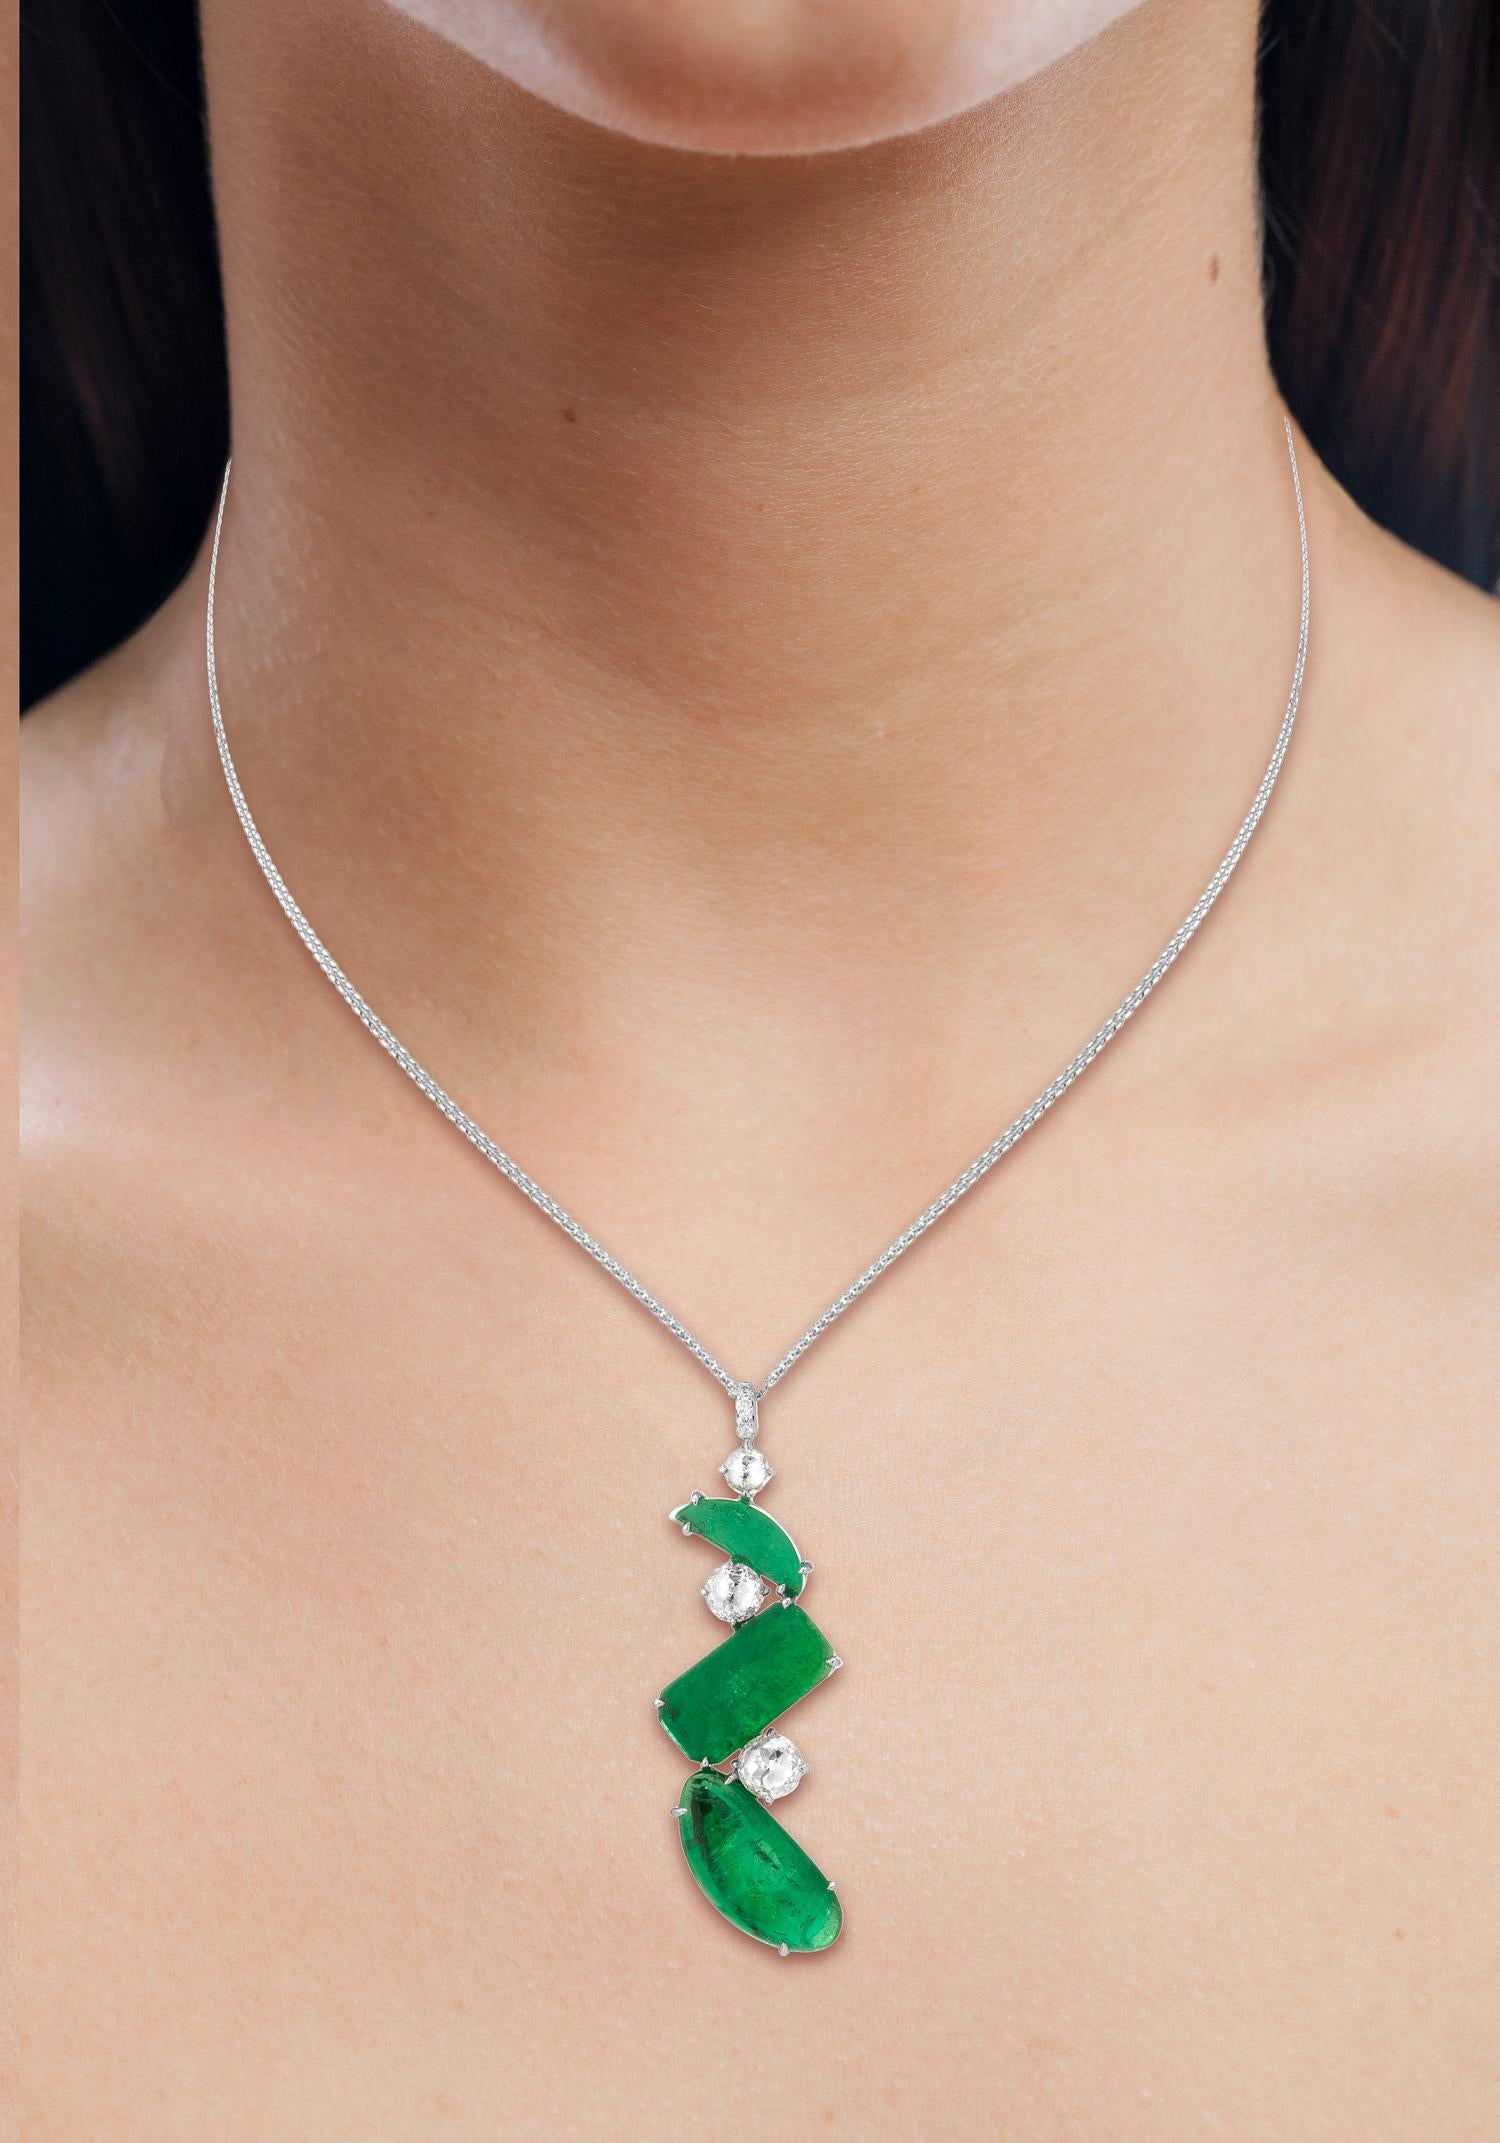 Modern 18 Karat white gold pendant set with mixed shape slices weighing 13.02 carats of Muzo Colombian emeralds and 1.72 carats of diamonds.

Muzo Emerald Colombia Heritage Atocha Necklace set with 13.02 carats Emerald.

Atocha is inspired by a